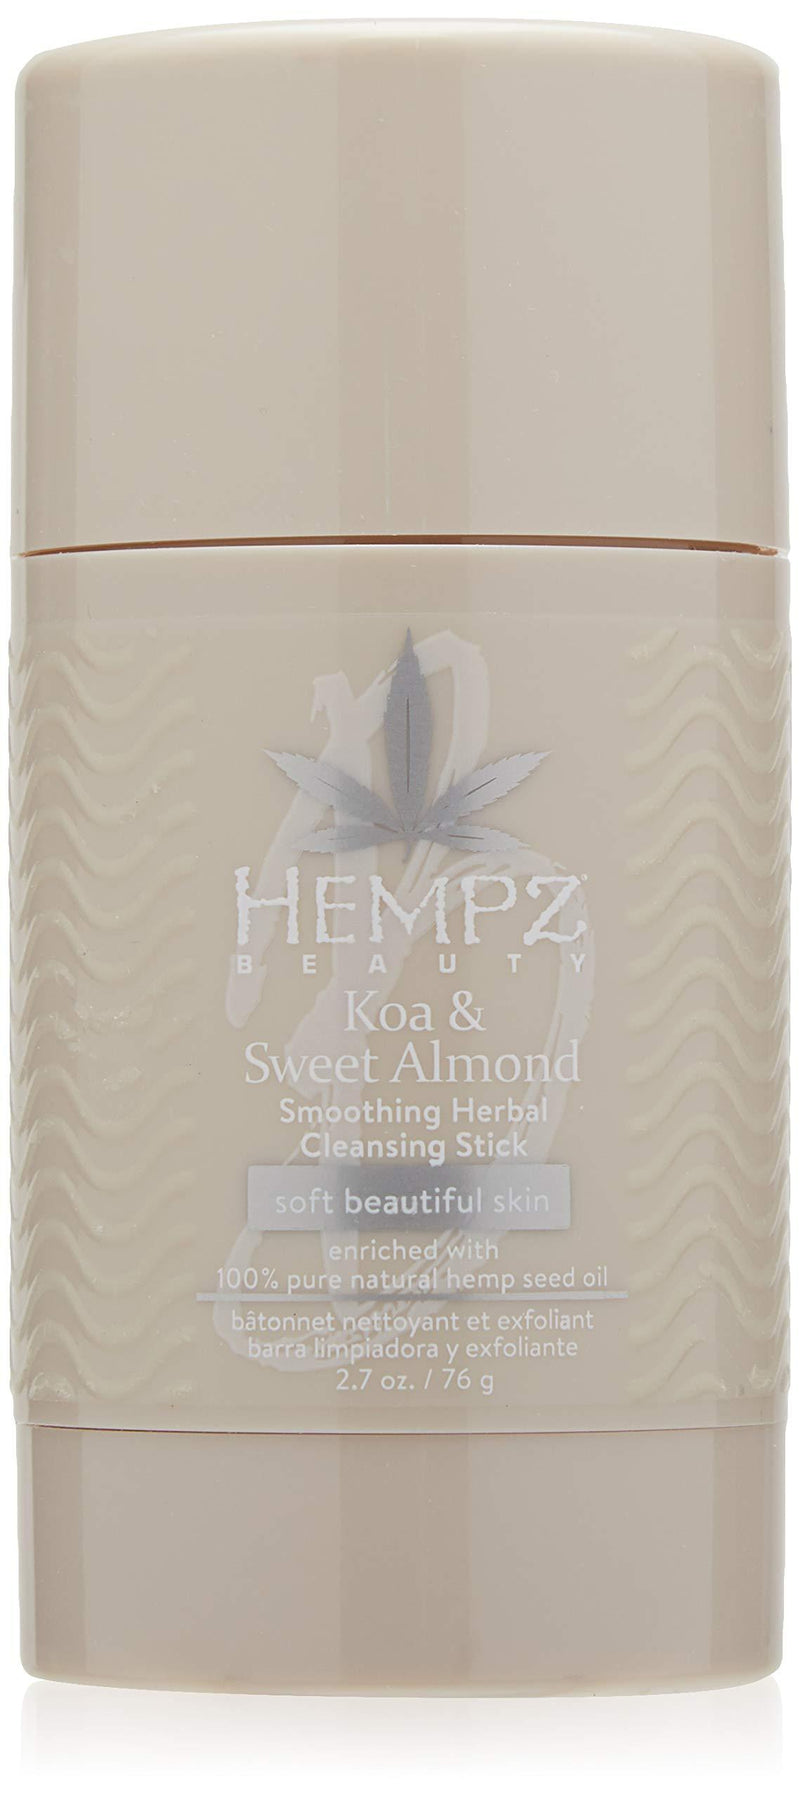 Hempz Smoothing Herbal Cleanser Stick with 100% Pure Hemp Seed Oil, Koa & Sweet Almond Scent, 2.7 oz - Gentle, In-Shower Moisturizing Cleansing Sticks with Fine Walnut Shell - Travel Exfoliating Scrub - BeesActive Australia